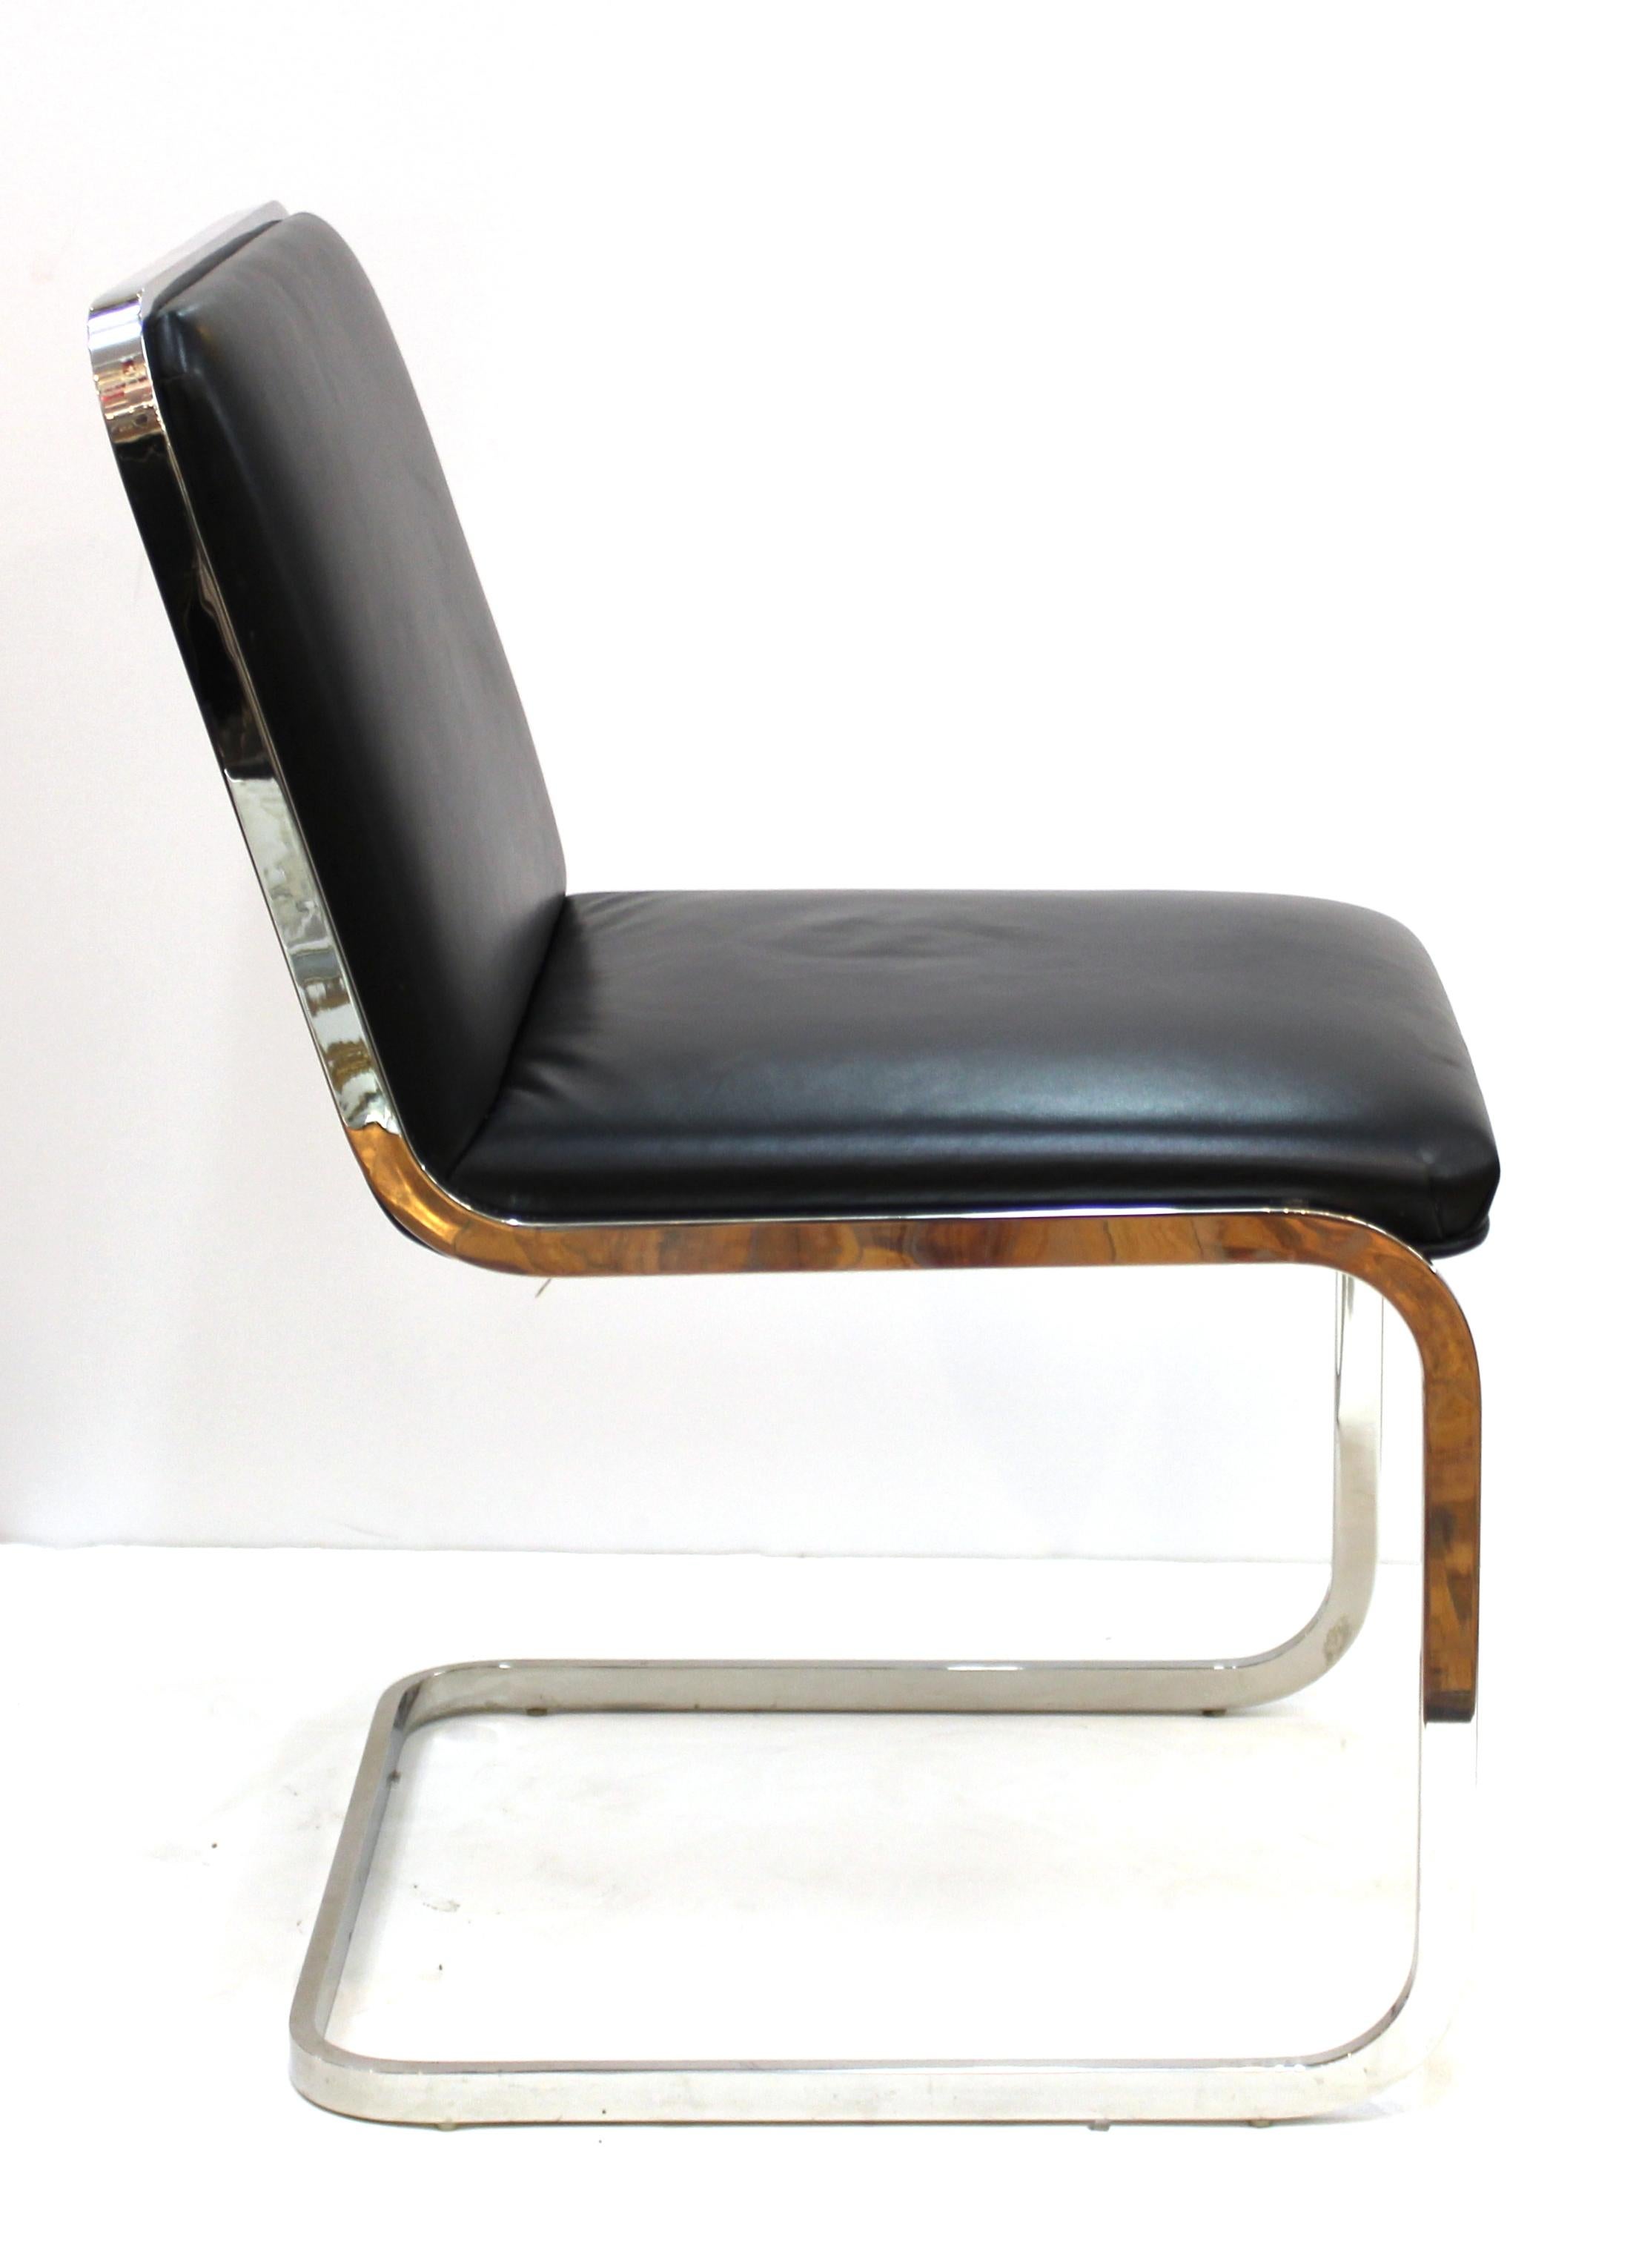 20th Century Brueton Mid-Century Modern Chrome Dining Chairs with Leather Upholstery